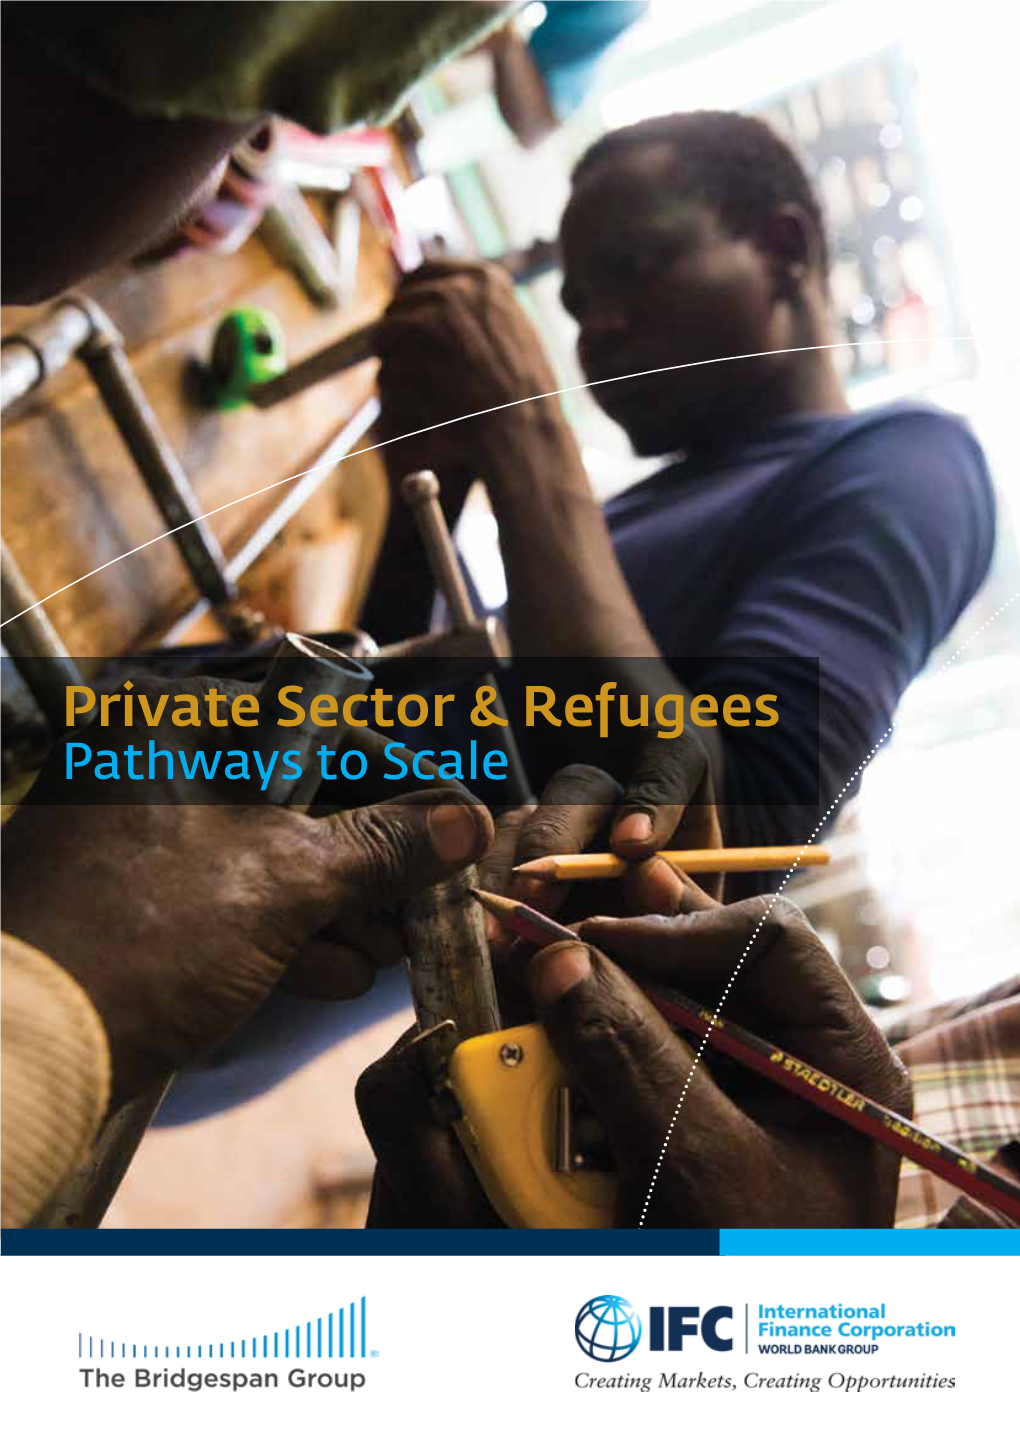 Private Sector & Refugees: Pathways to Scale